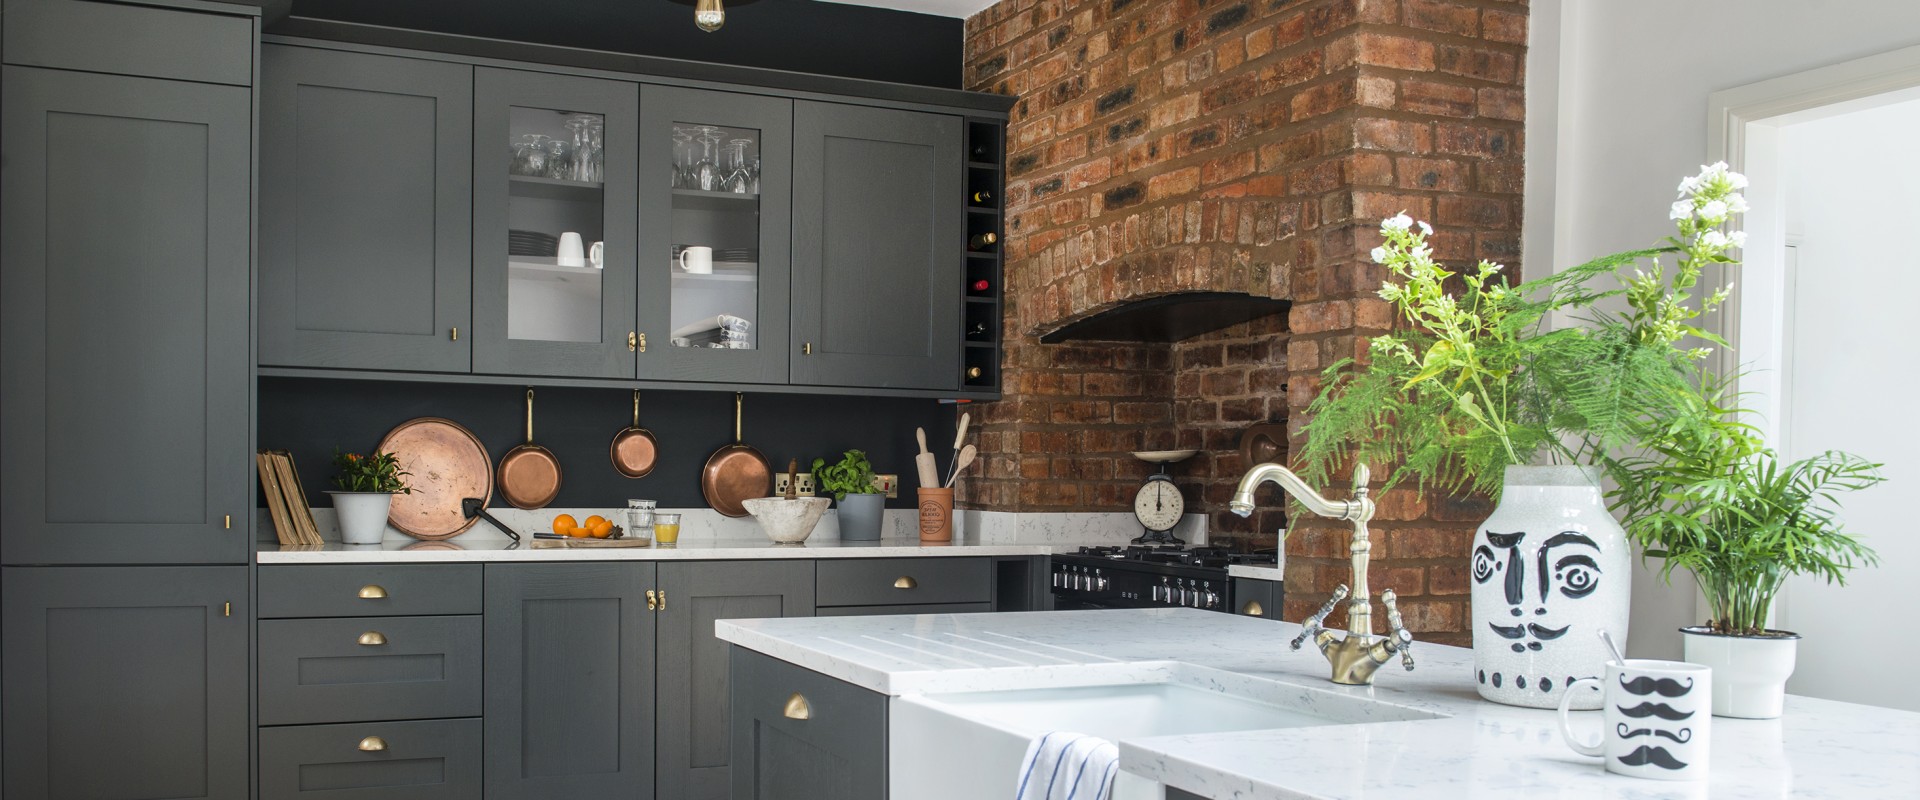 Which kitchen company is best?